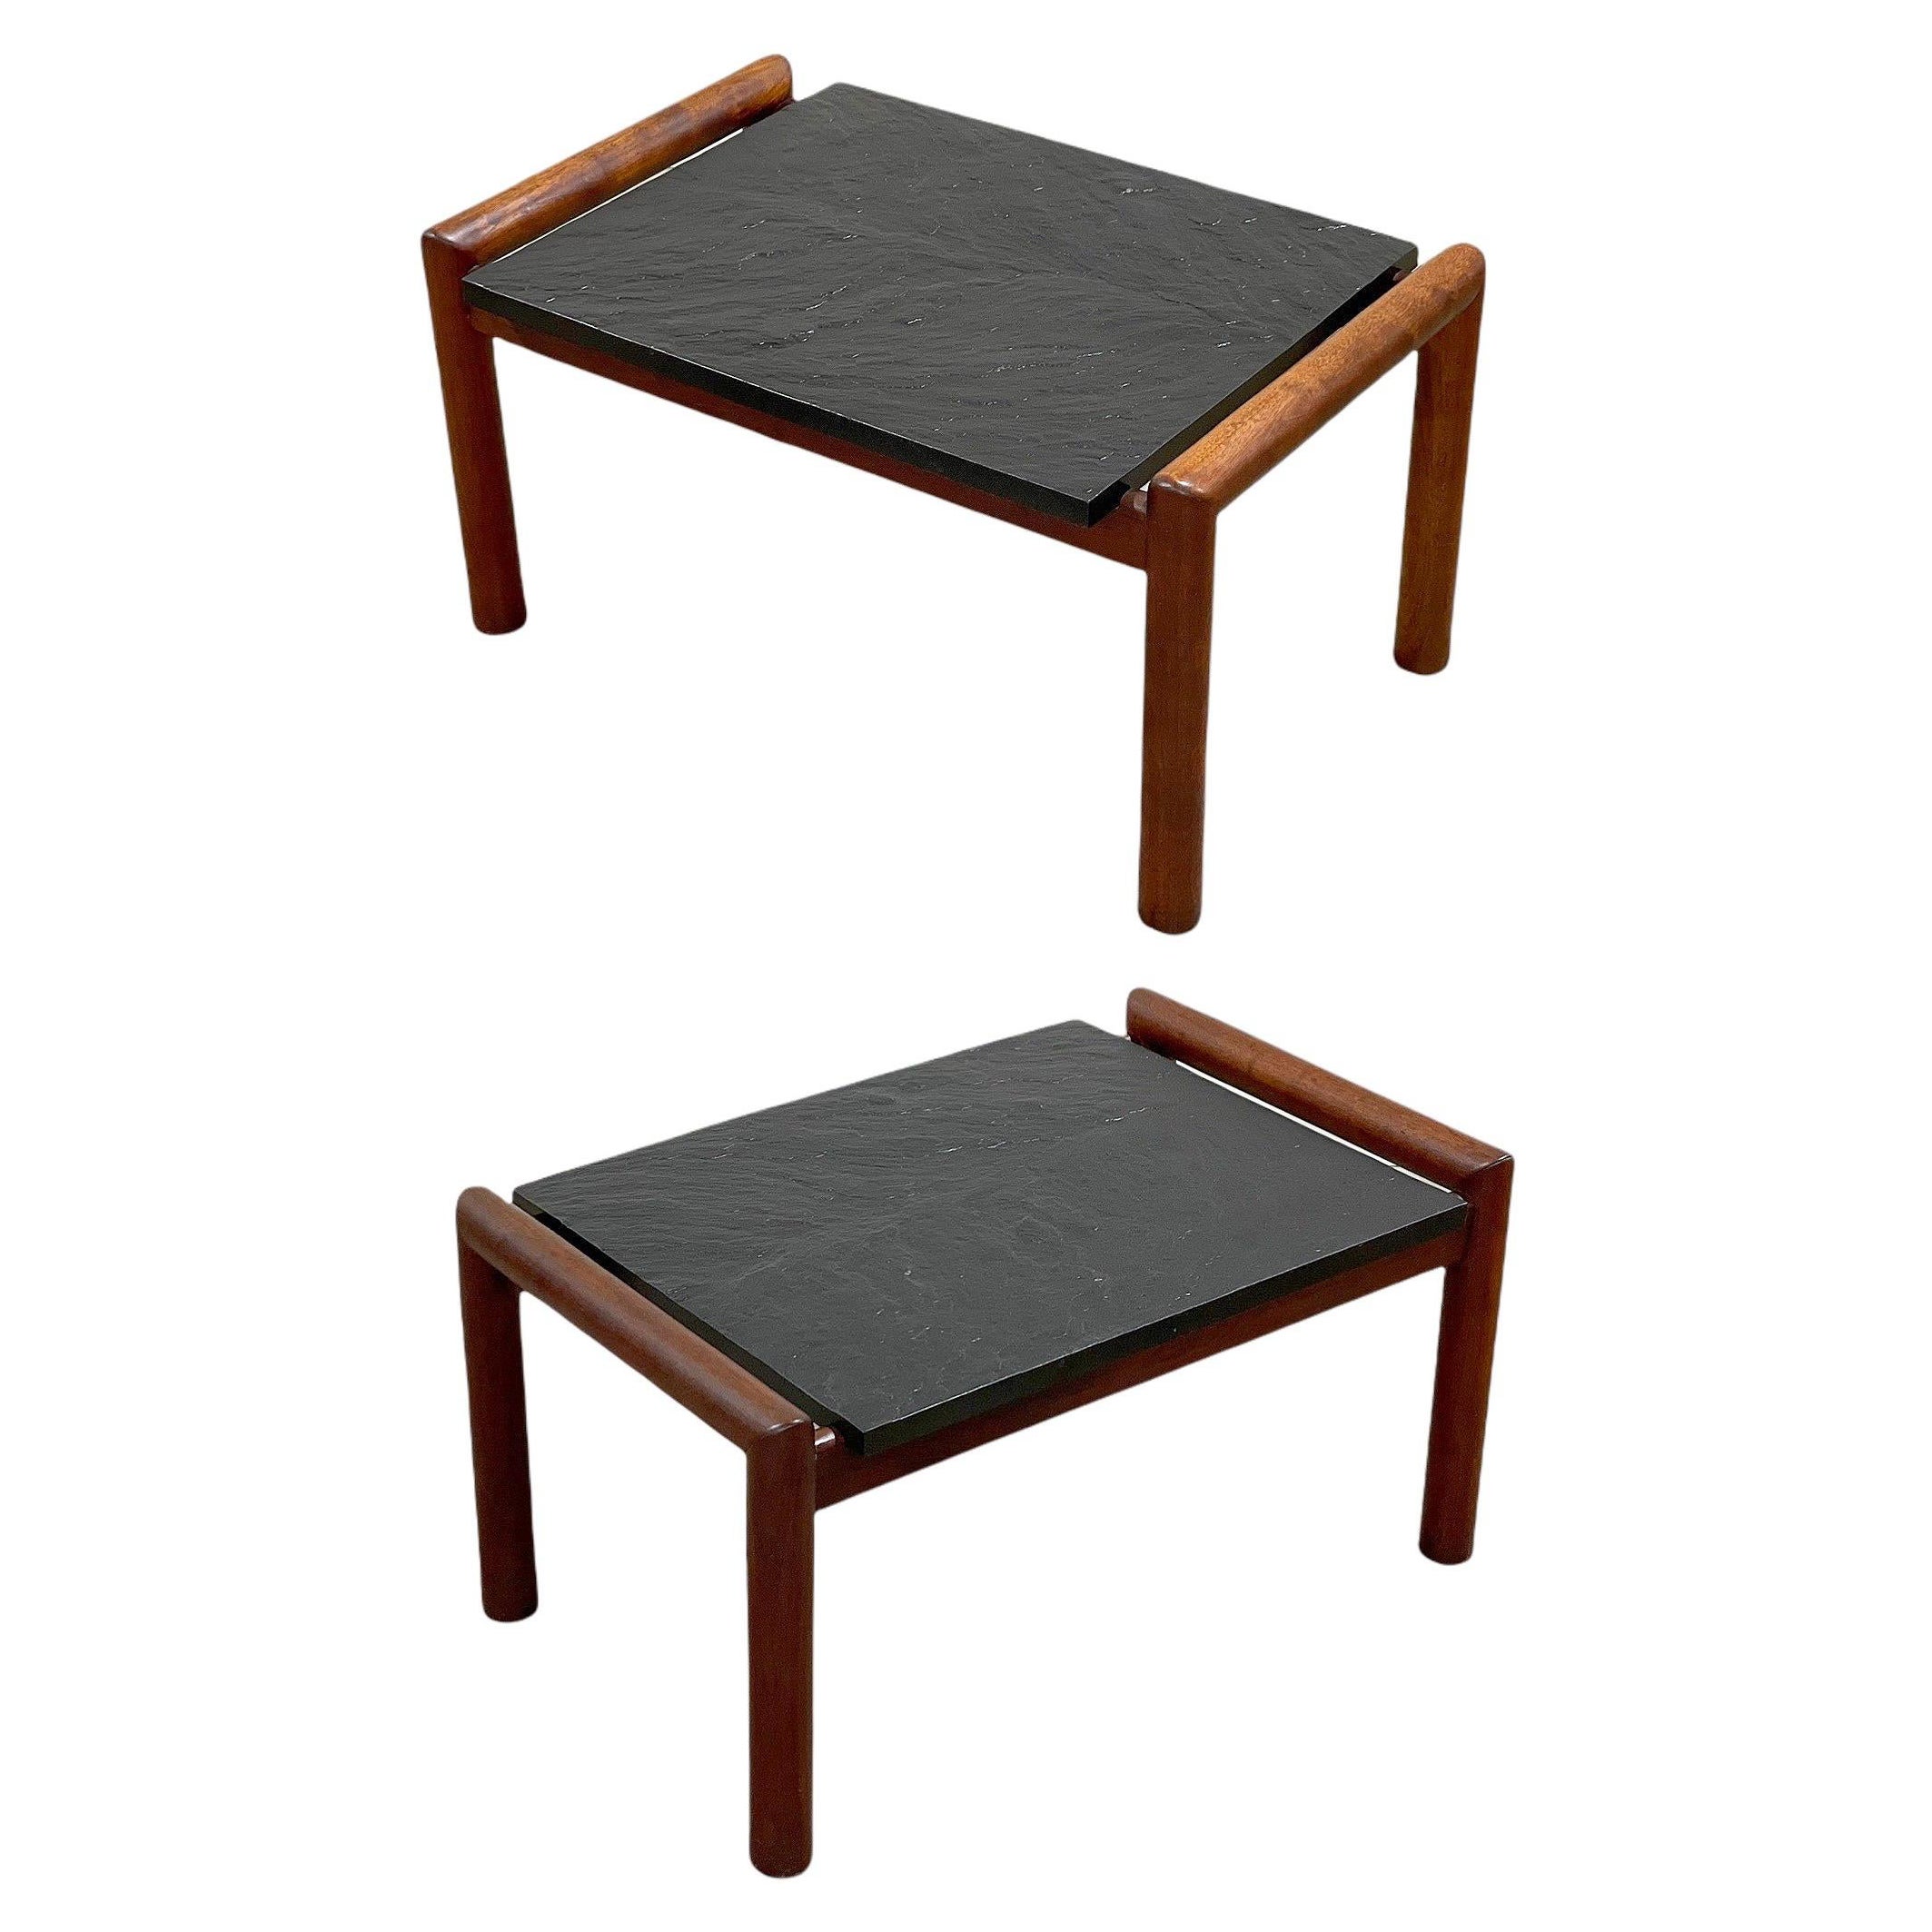 Pair Adrian Pearsall Midcentury Organic Modern Side Tables in Walnut and Slate